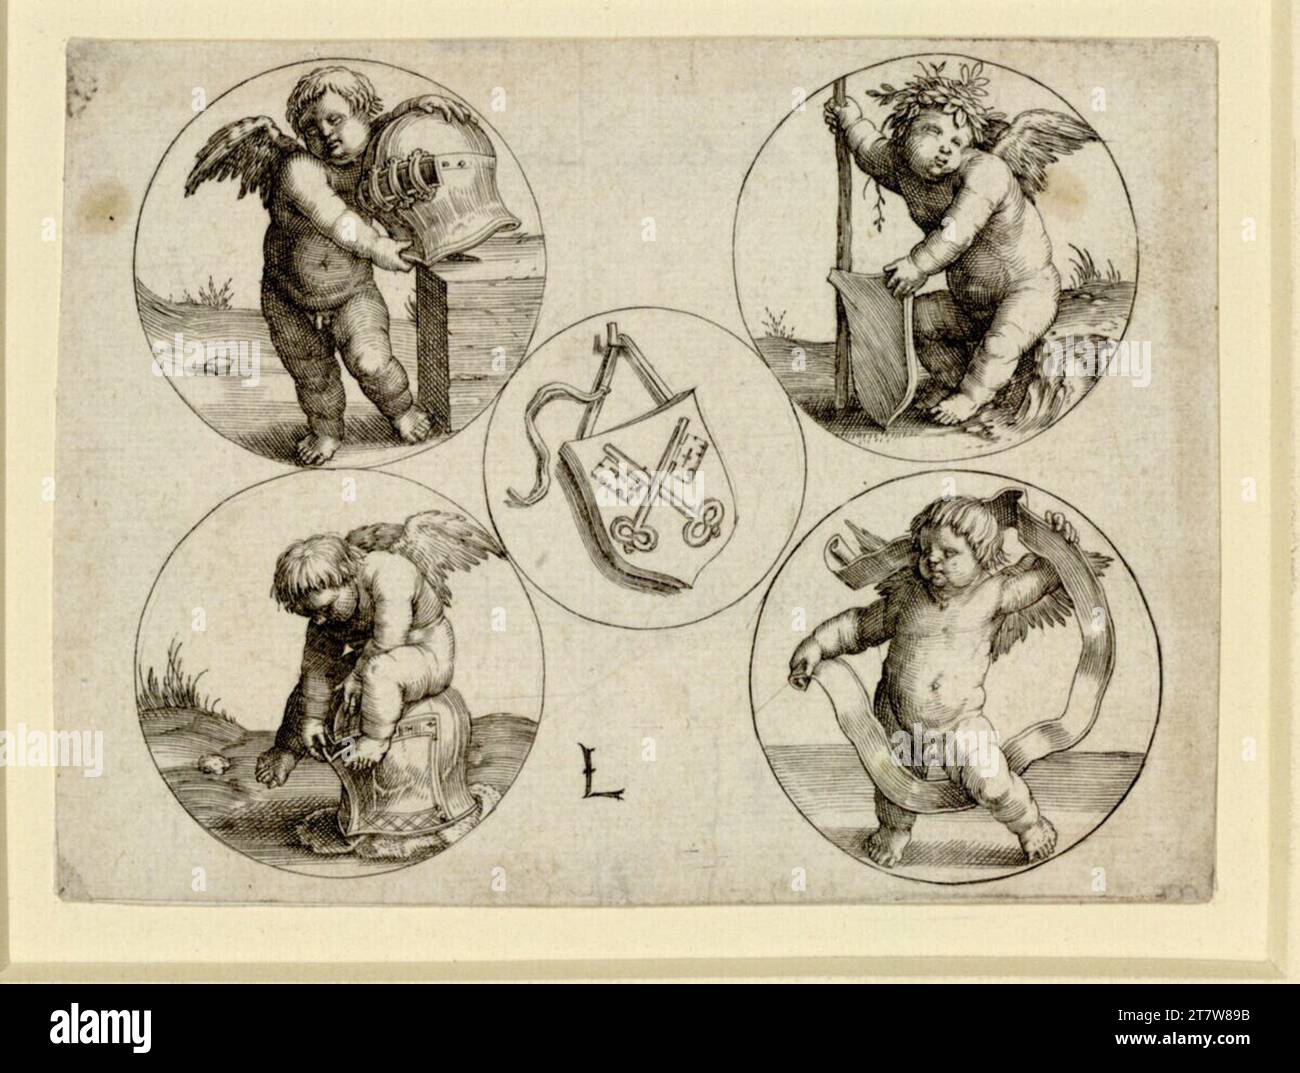 Lucas Hugensz. van Leyden City of the city Leiden, surrounded by four medallions with putti. Copper engraving print around 1510 Stock Photo